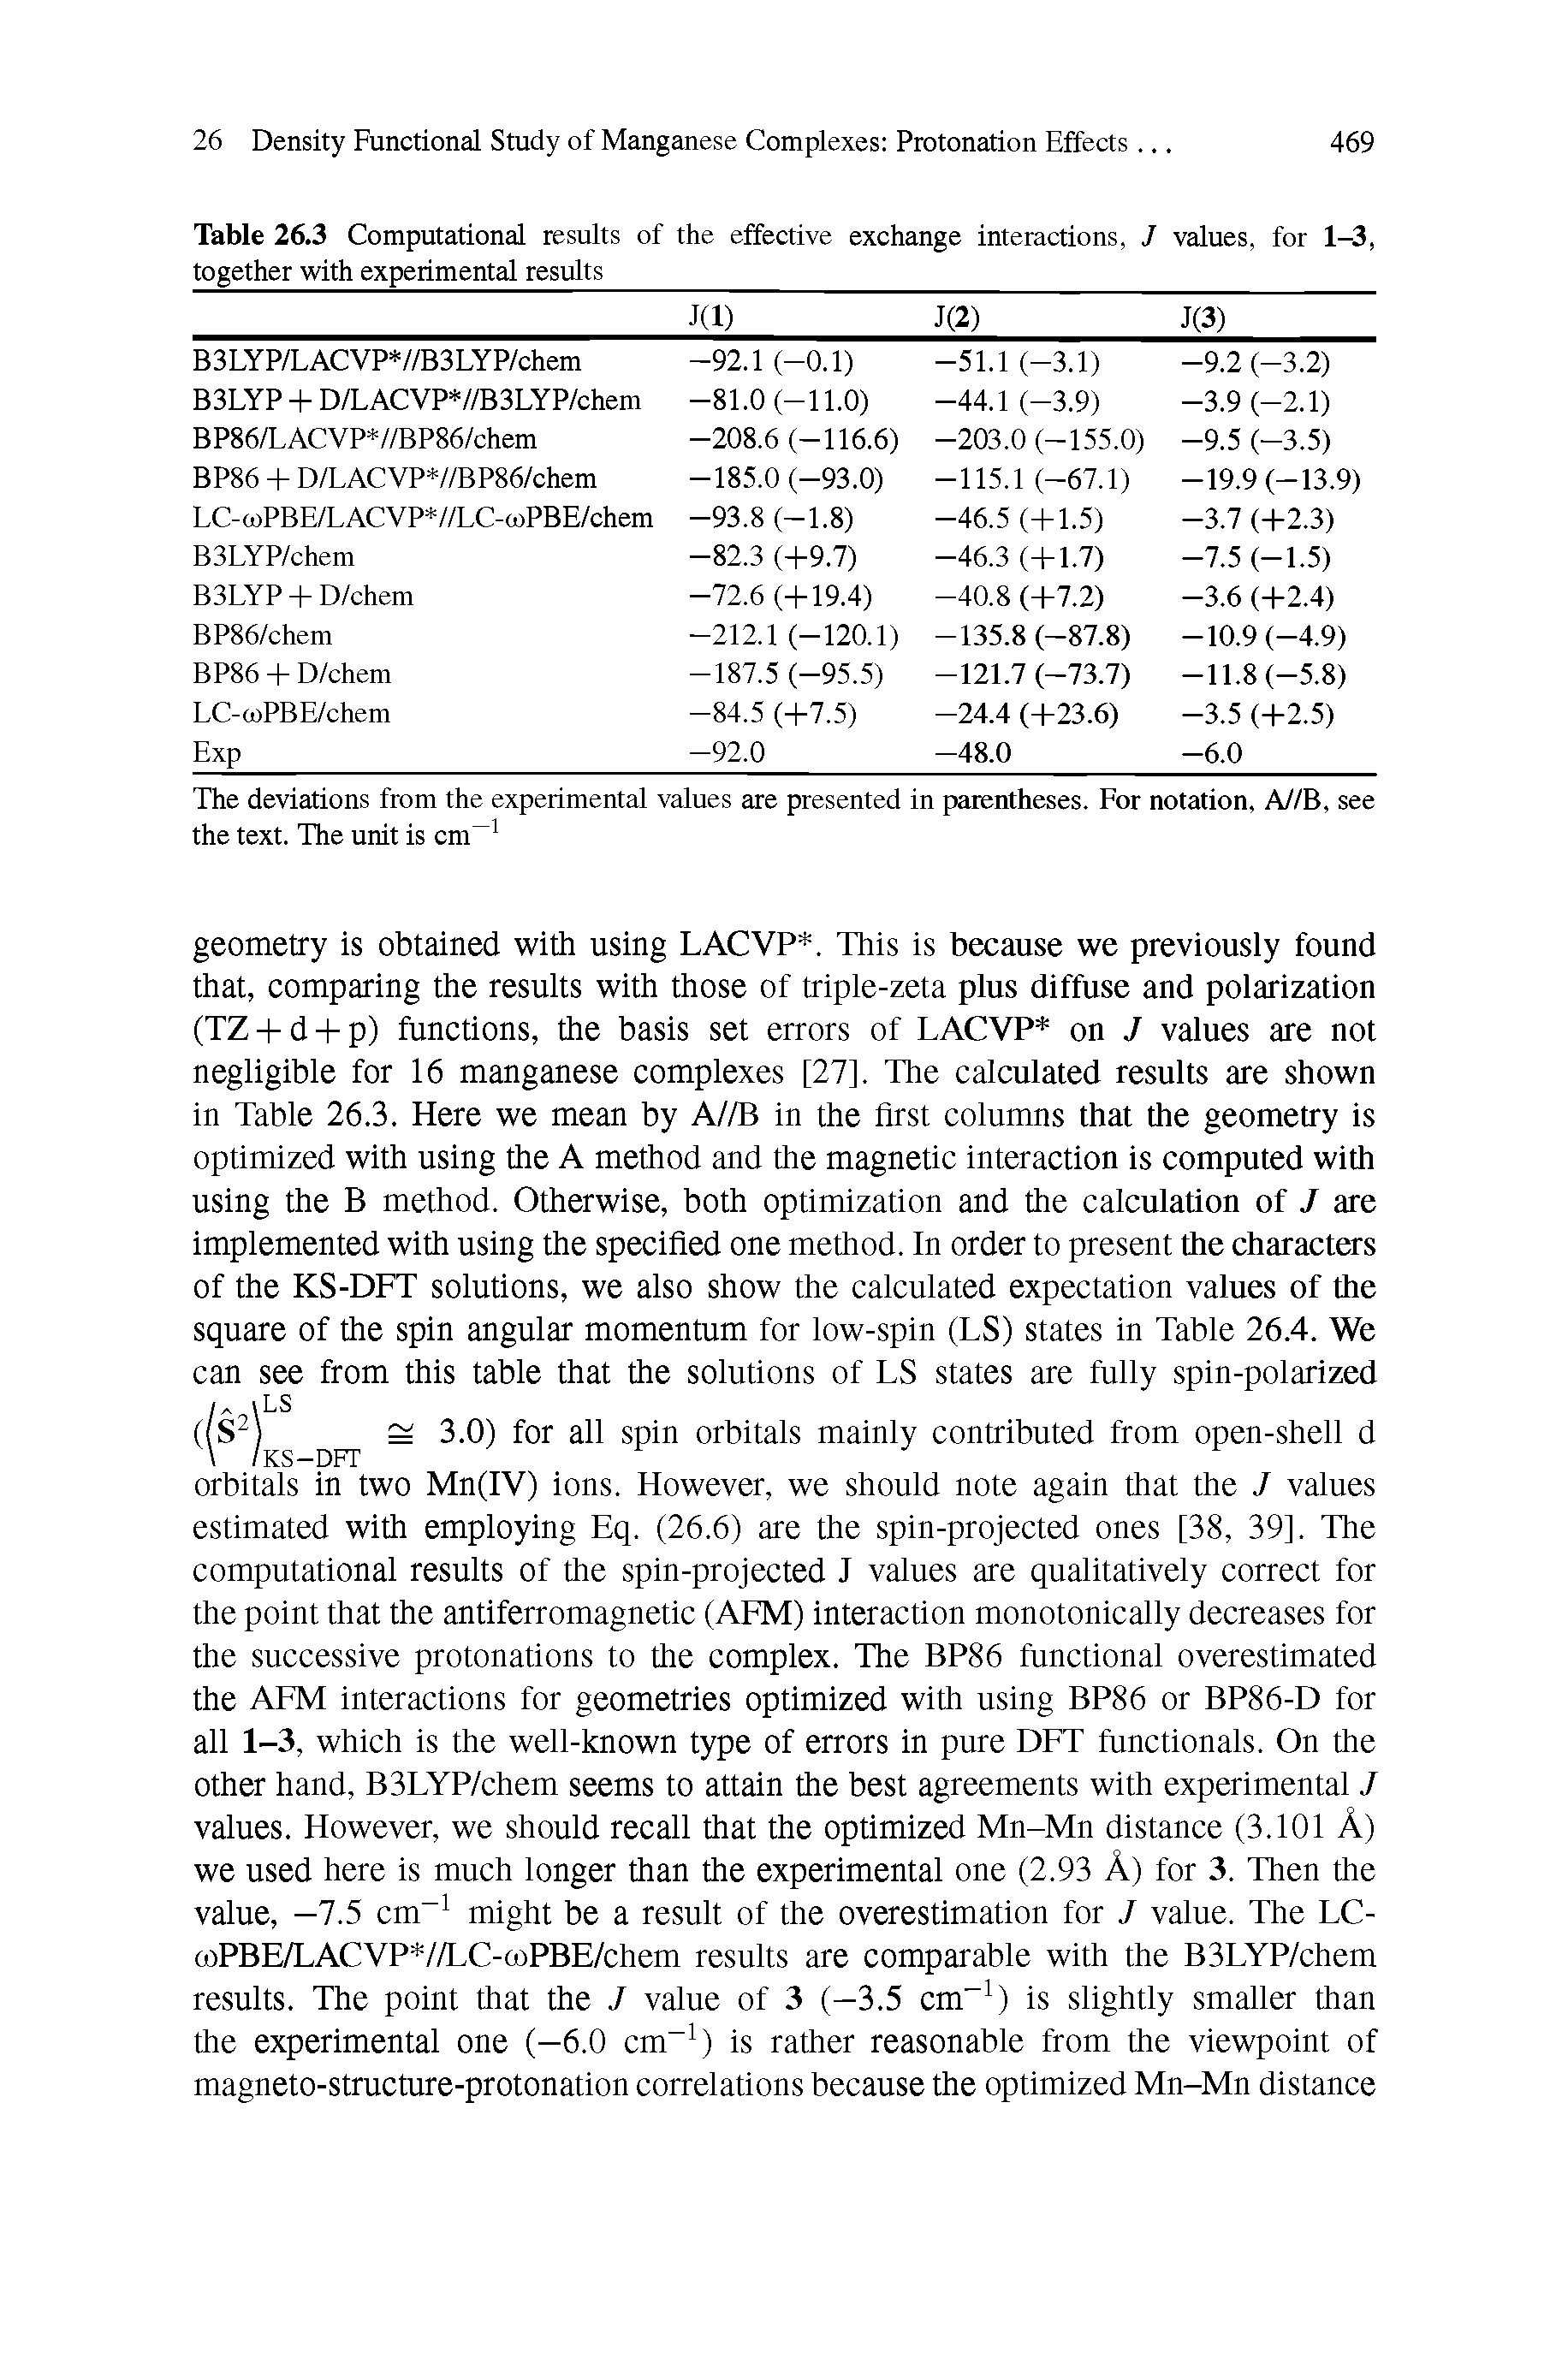 Table 26.3 Computational results of the effective exchange interactions, J values, for 1-3, together with experimental results...